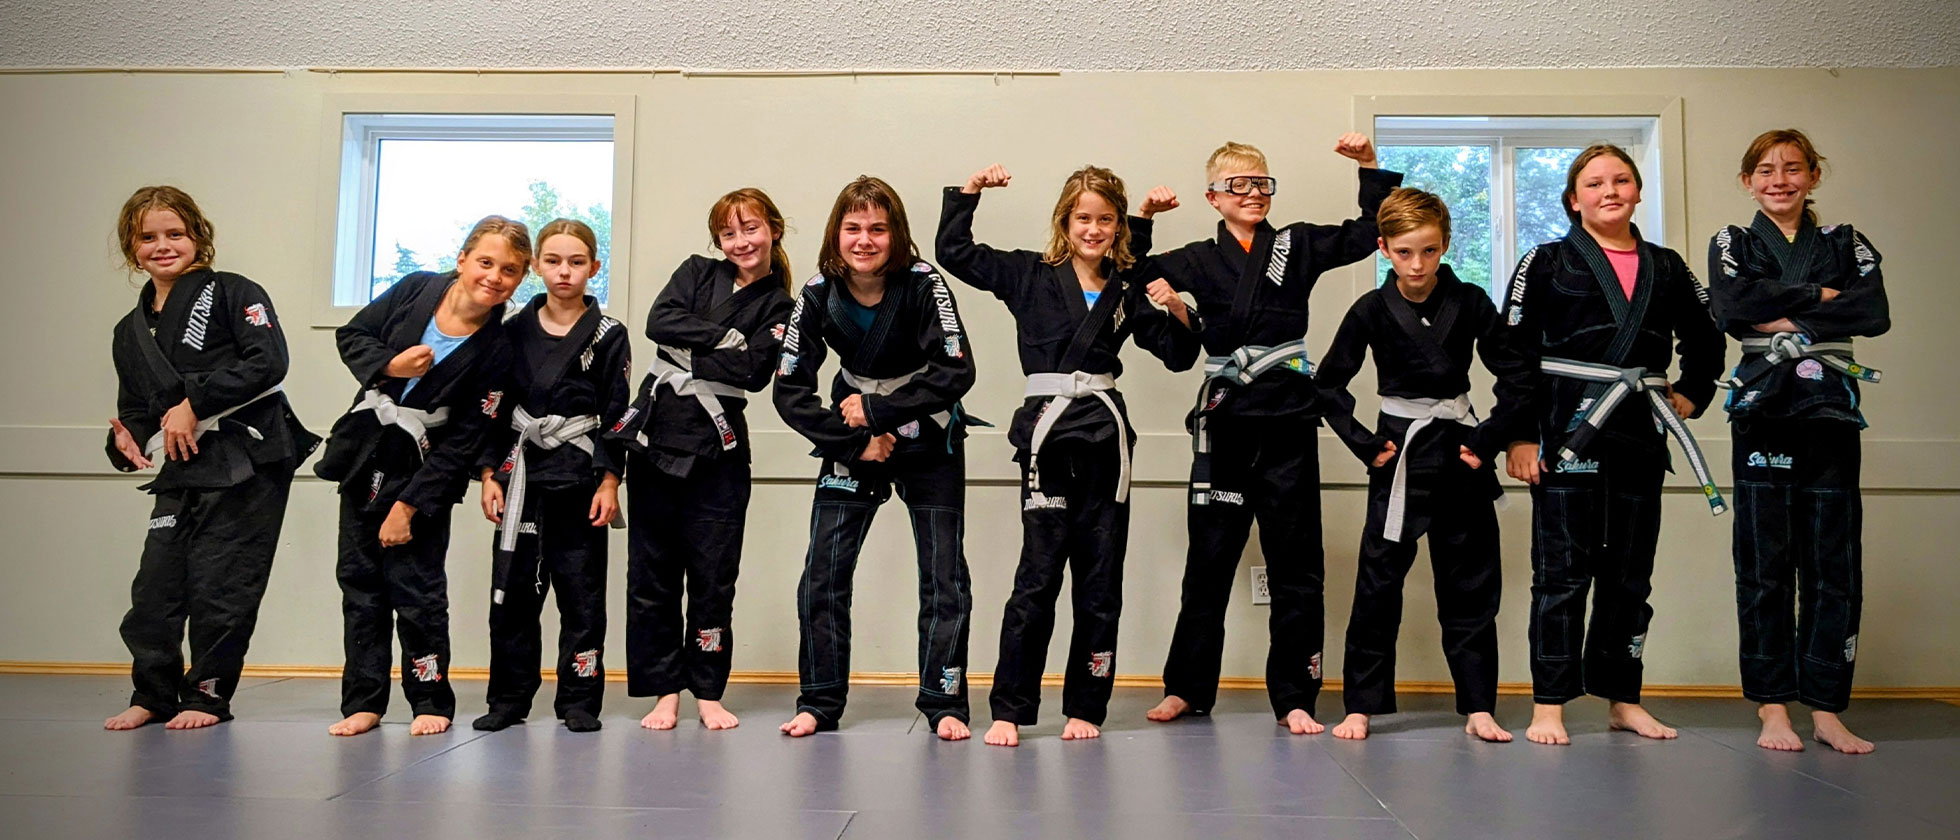 Youth 9-12 years old BJJ program In Sherwood Park, Canada